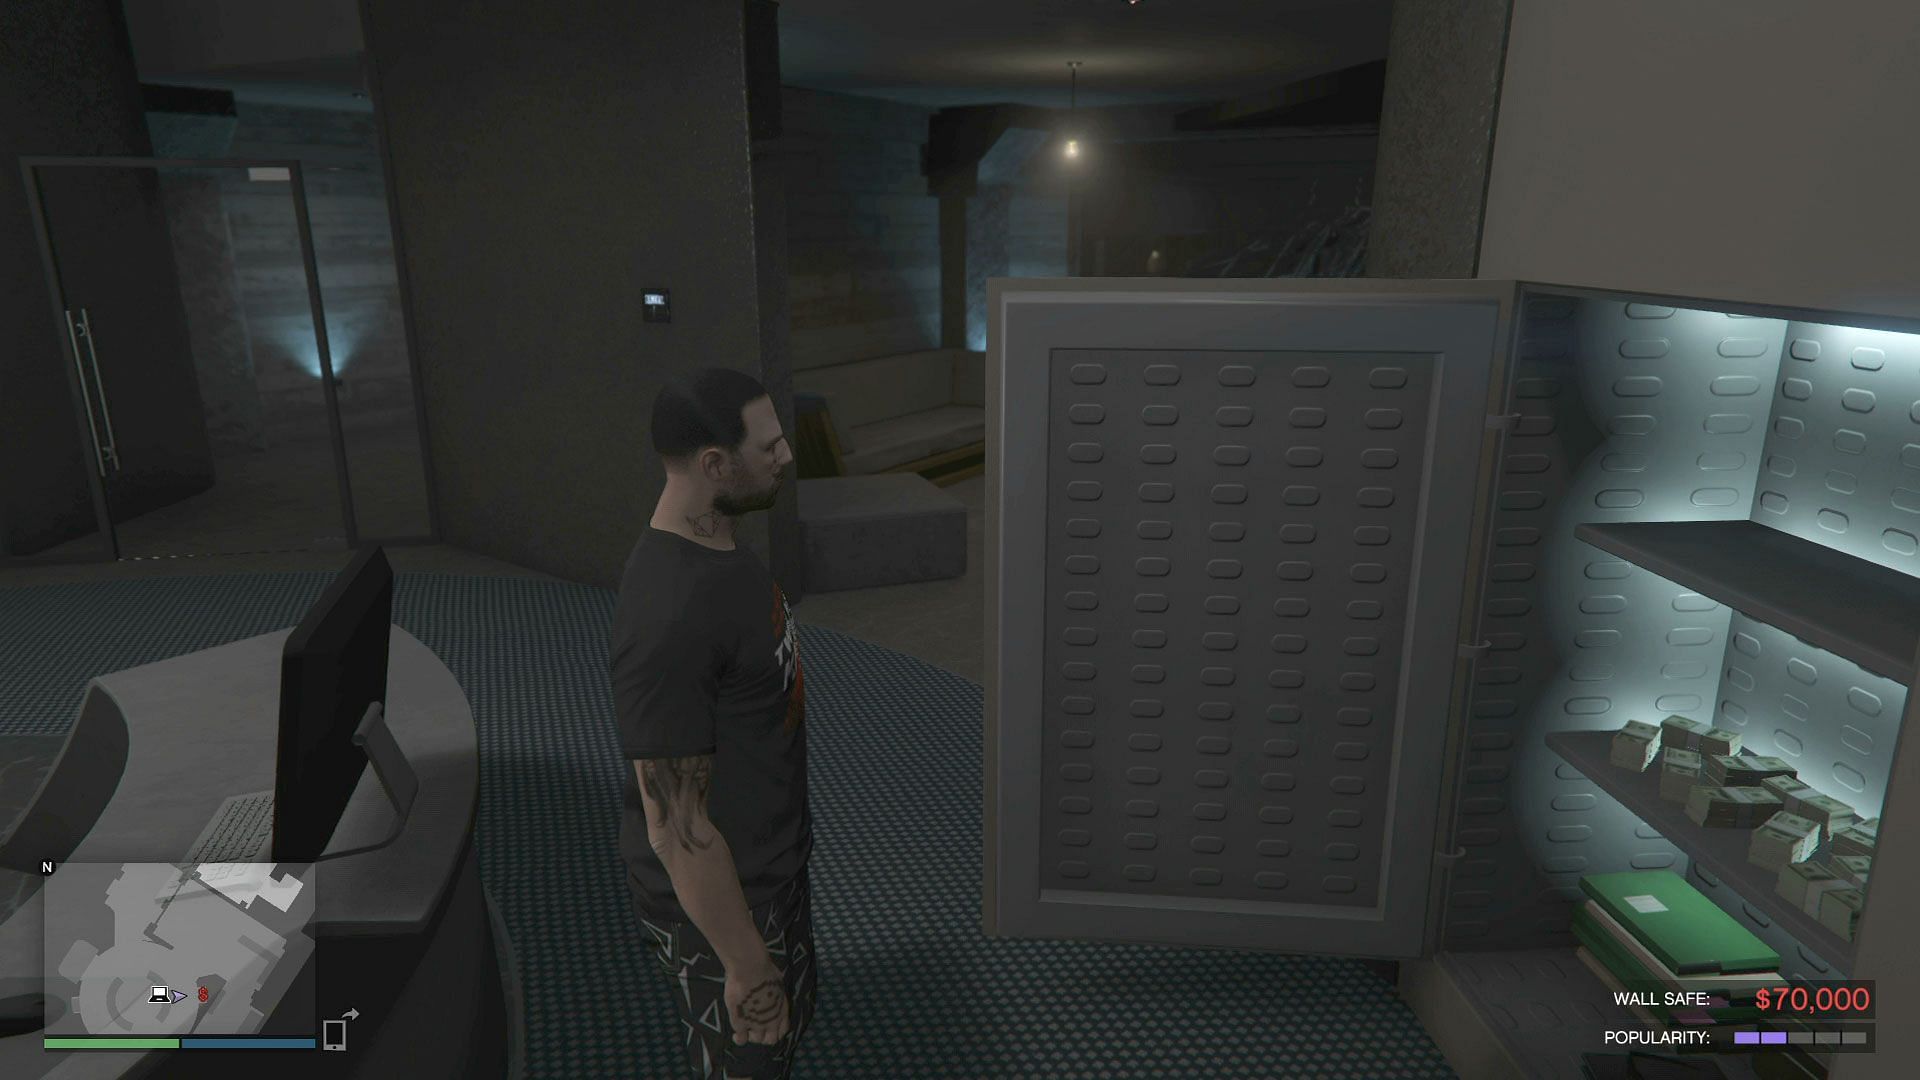 What the wall safe looks like in GTA Online (Image via Rockstar Games)